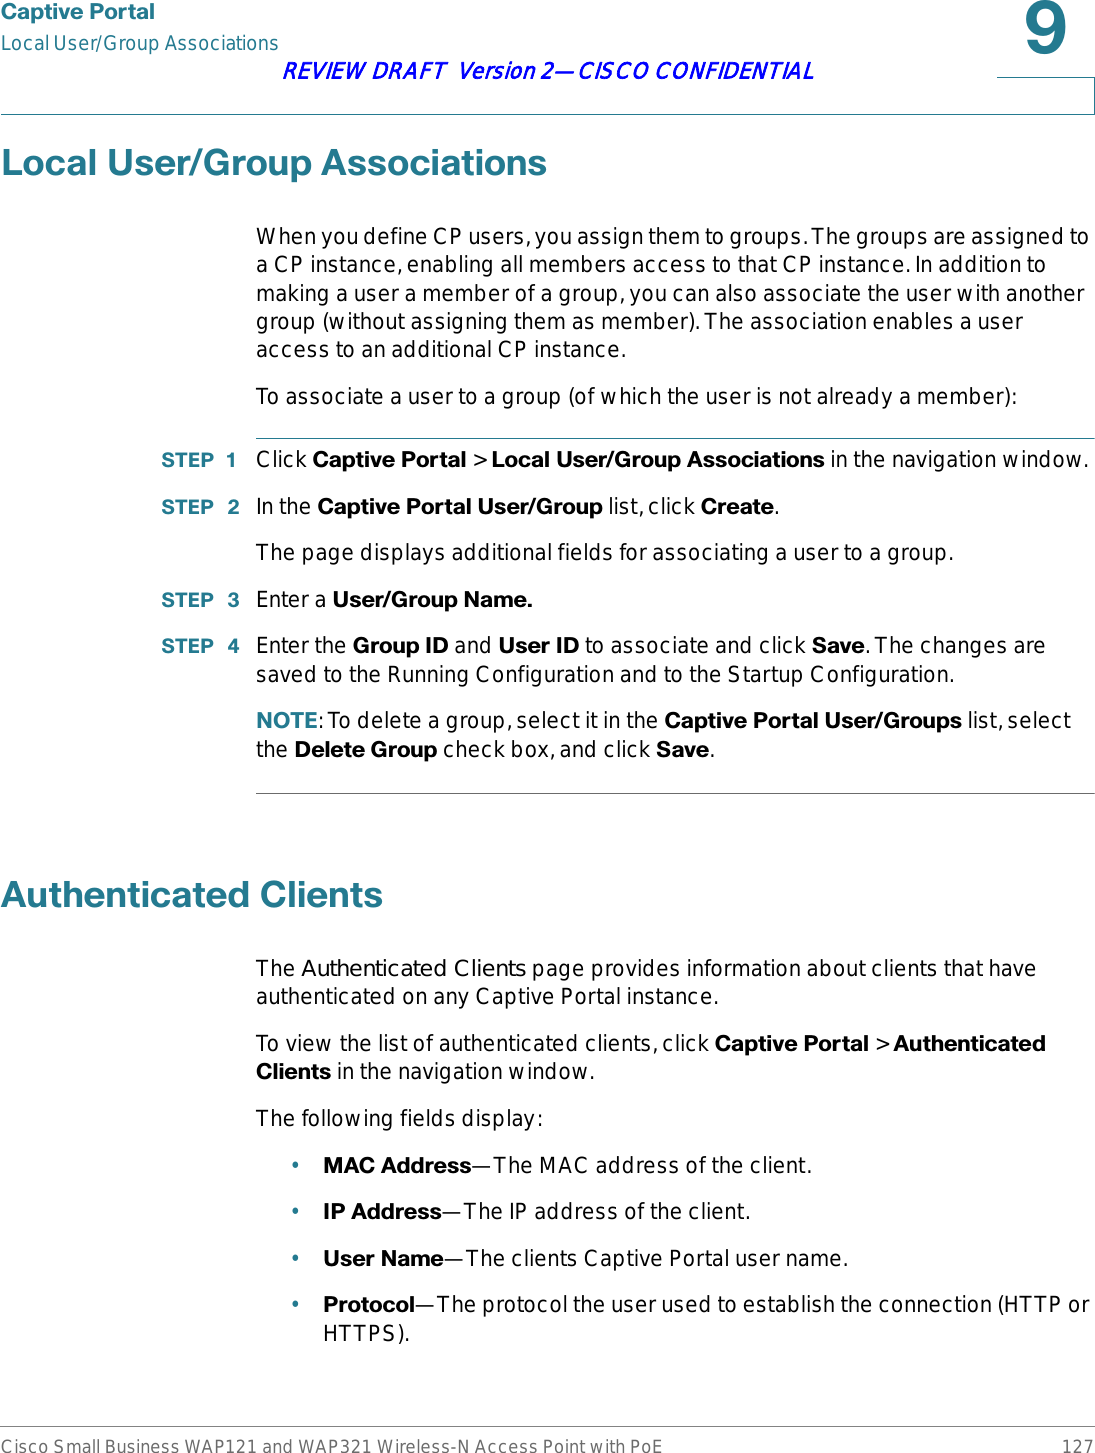 &amp;DSWLYH3RUWDOLocal User/Group AssociationsCisco Small Business WAP121 and WAP321 Wireless-N Access Point with PoE 127REVIEW DRAFT  Version 2—CISCO CONFIDENTIAL/RFDO8VHU*URXS$VVRFLDWLRQVWhen you define CP users, you assign them to groups. The groups are assigned to a CP instance, enabling all members access to that CP instance. In addition to making a user a member of a group, you can also associate the user with another group (without assigning them as member). The association enables a user access to an additional CP instance.To associate a user to a group (of which the user is not already a member):67(3  Click &amp;DSWLYH3RUWDO &gt; /RFDO8VHU*URXS$VVRFLDWLRQV in the navigation window.67(3  In the &amp;DSWLYH3RUWDO8VHU*URXS list, click &amp;UHDWH.The page displays additional fields for associating a user to a group.67(3  Enter a 8VHU*URXS1DPH67(3  Enter the *URXS,&apos;and 8VHU,&apos; to associate and click 6DYH. The changes are saved to the Running Configuration and to the Startup Configuration.127(: To delete a group, select it in the &amp;DSWLYH3RUWDO8VHU*URXSV list, select the &apos;HOHWH*URXS check box, and click 6DYH.$XWKHQWLFDWHG&amp;OLHQWVThe Authenticated Clients page provides information about clients that have authenticated on any Captive Portal instance.To view the list of authenticated clients, click &amp;DSWLYH3RUWDO &gt; $XWKHQWLFDWHG&amp;OLHQWV in the navigation window.The following fields display:•0$&amp;$GGUHVV—The MAC address of the client.•,3$GGUHVV—The IP address of the client.•8VHU1DPH—The clients Captive Portal user name.•3URWRFRO—The protocol the user used to establish the connection (HTTP or HTTPS).